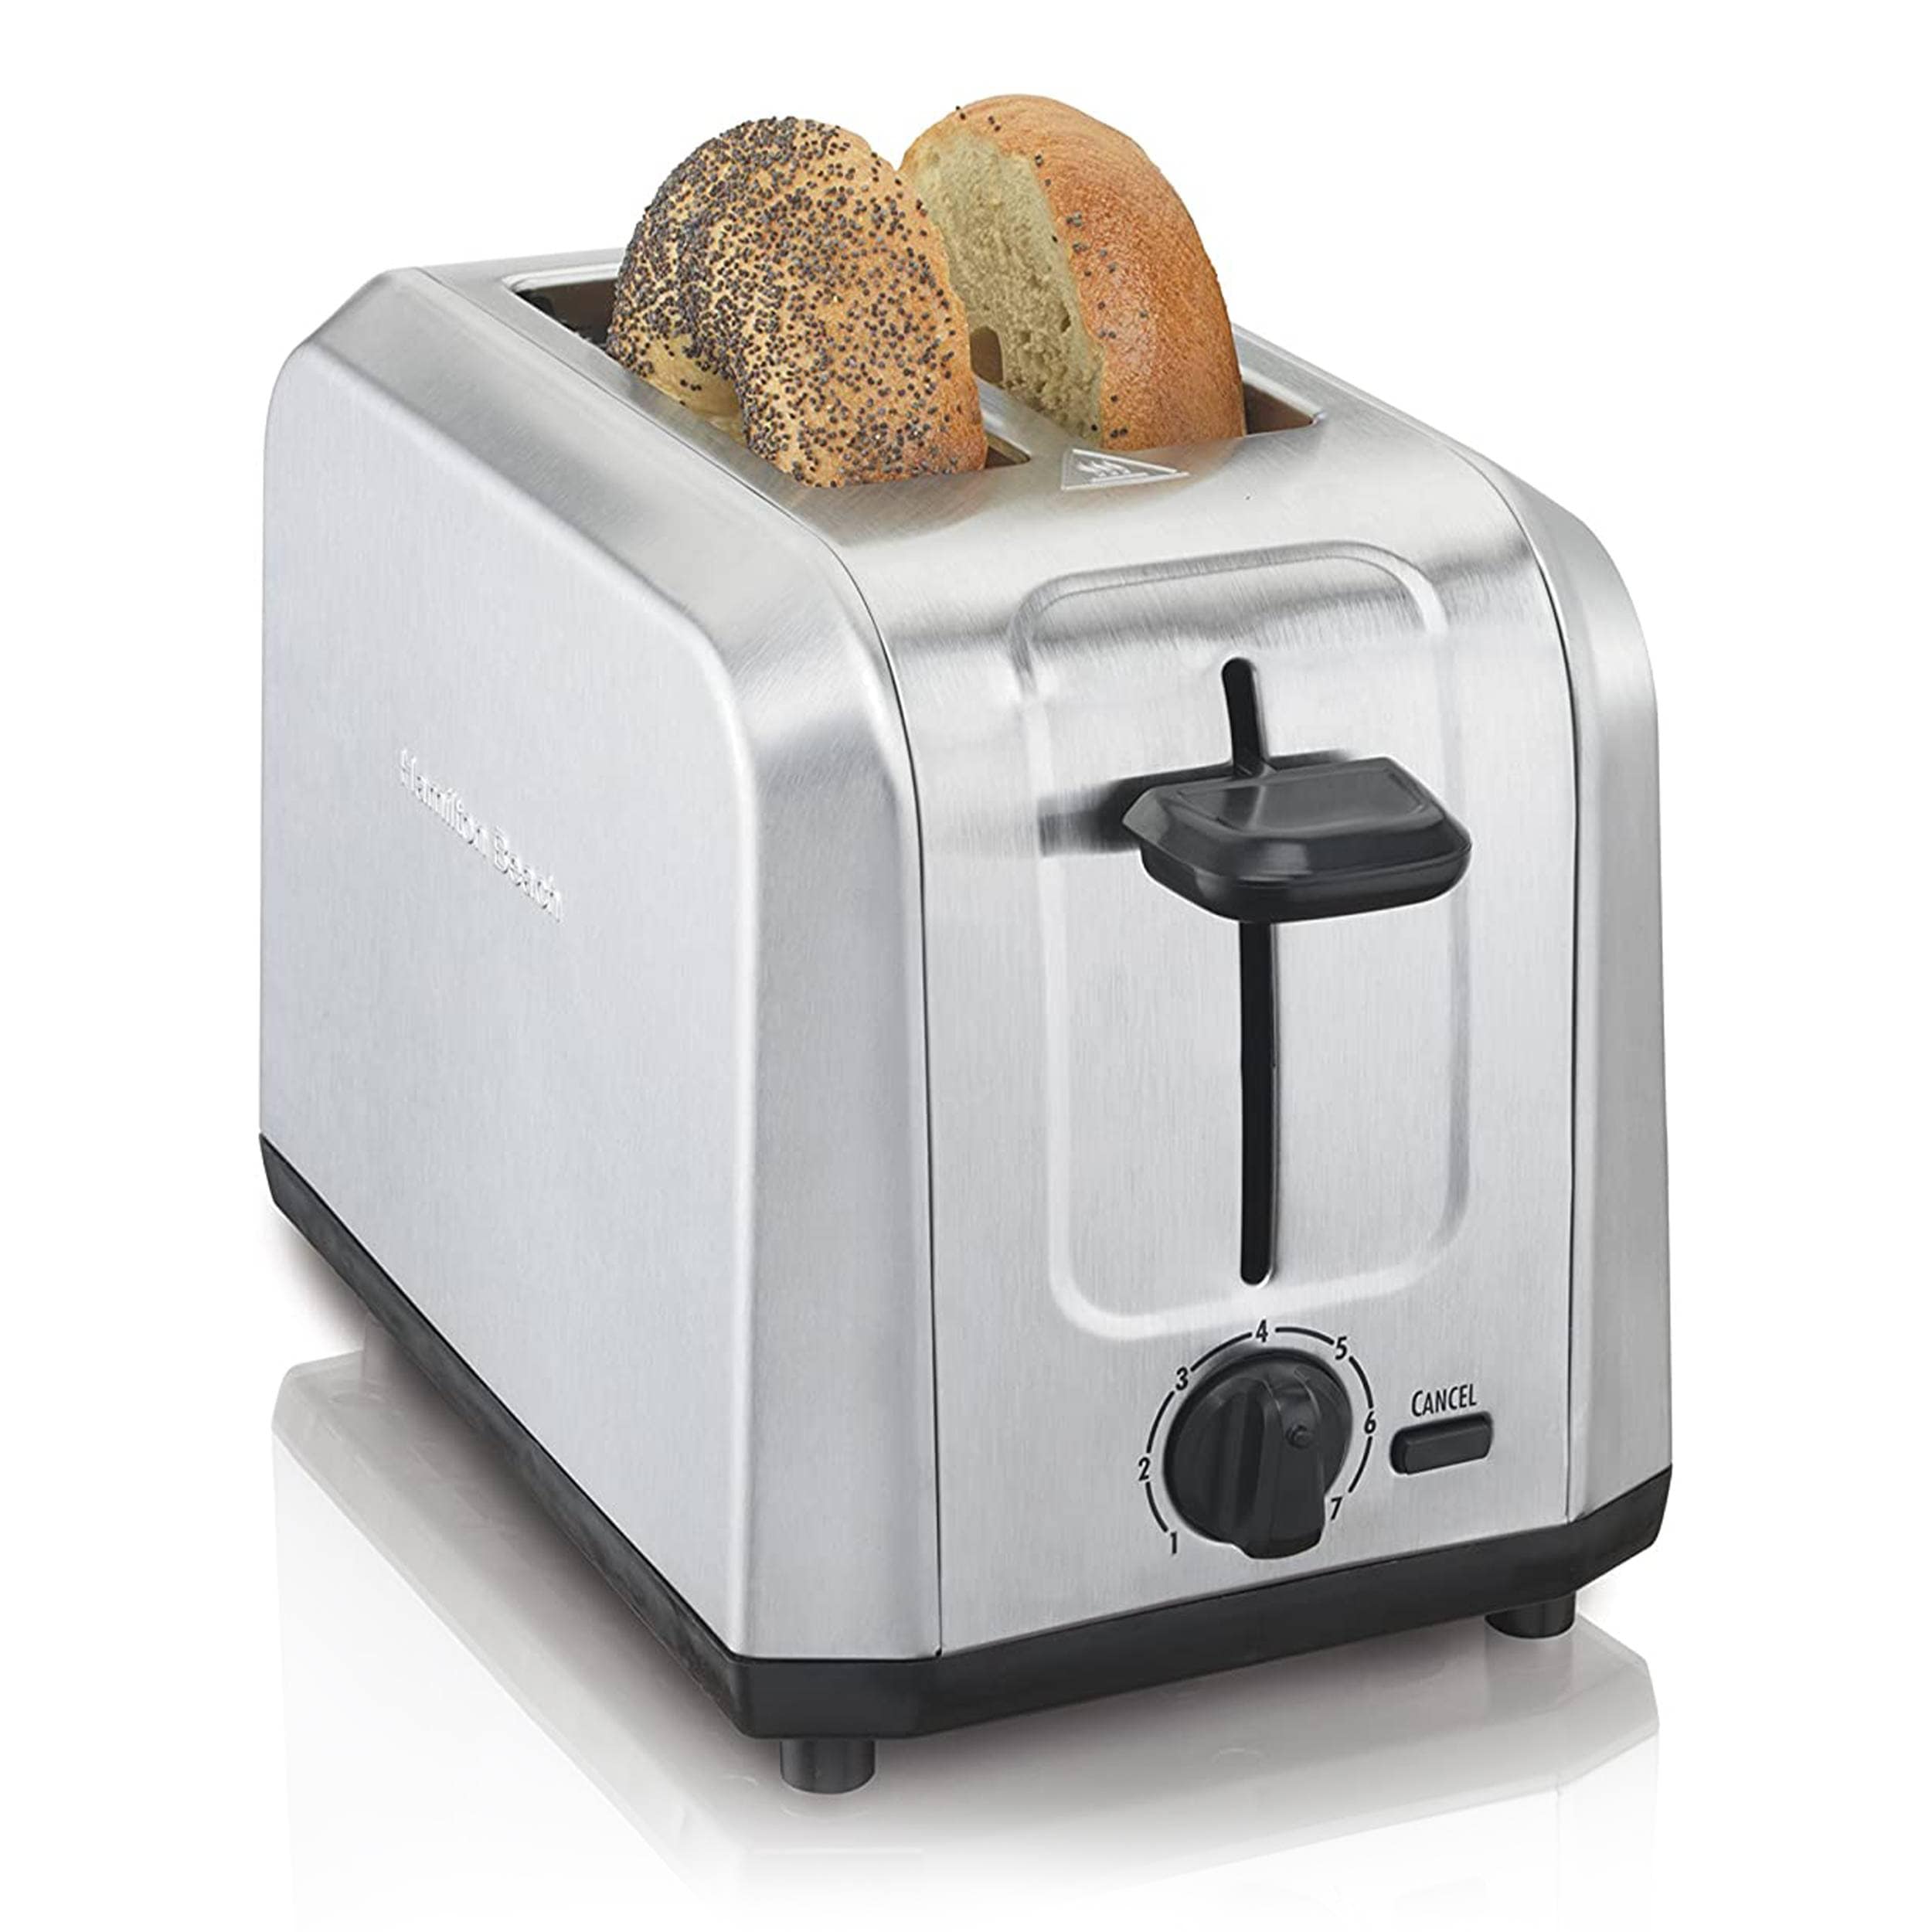 Hamilton Beach 2 Slice Toaster with Extra-Wide Slots 22217 Review